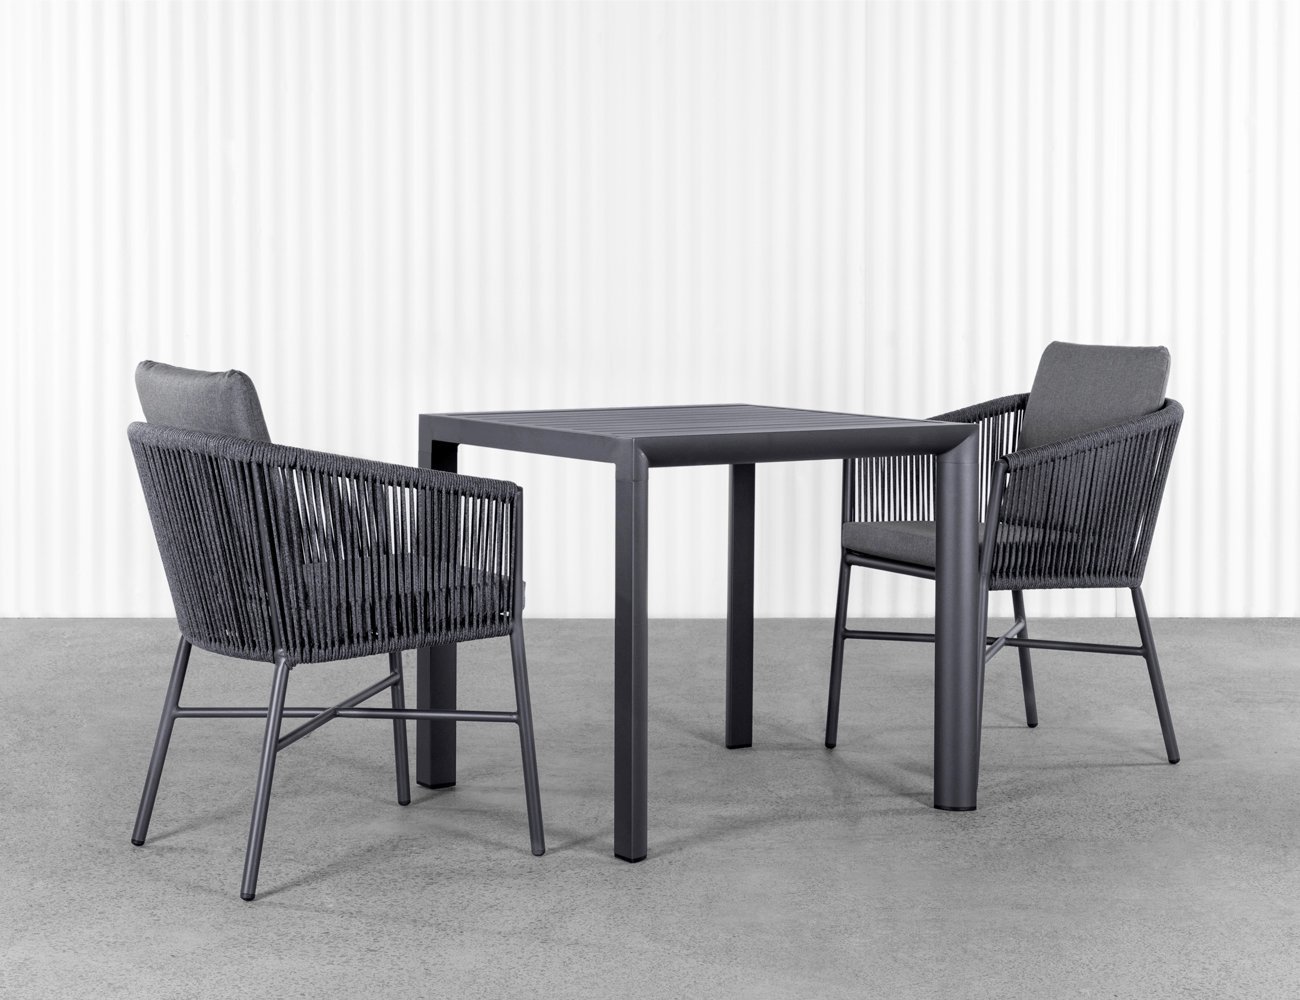 1×Arcus Outdoor Table+2×Dining Chair